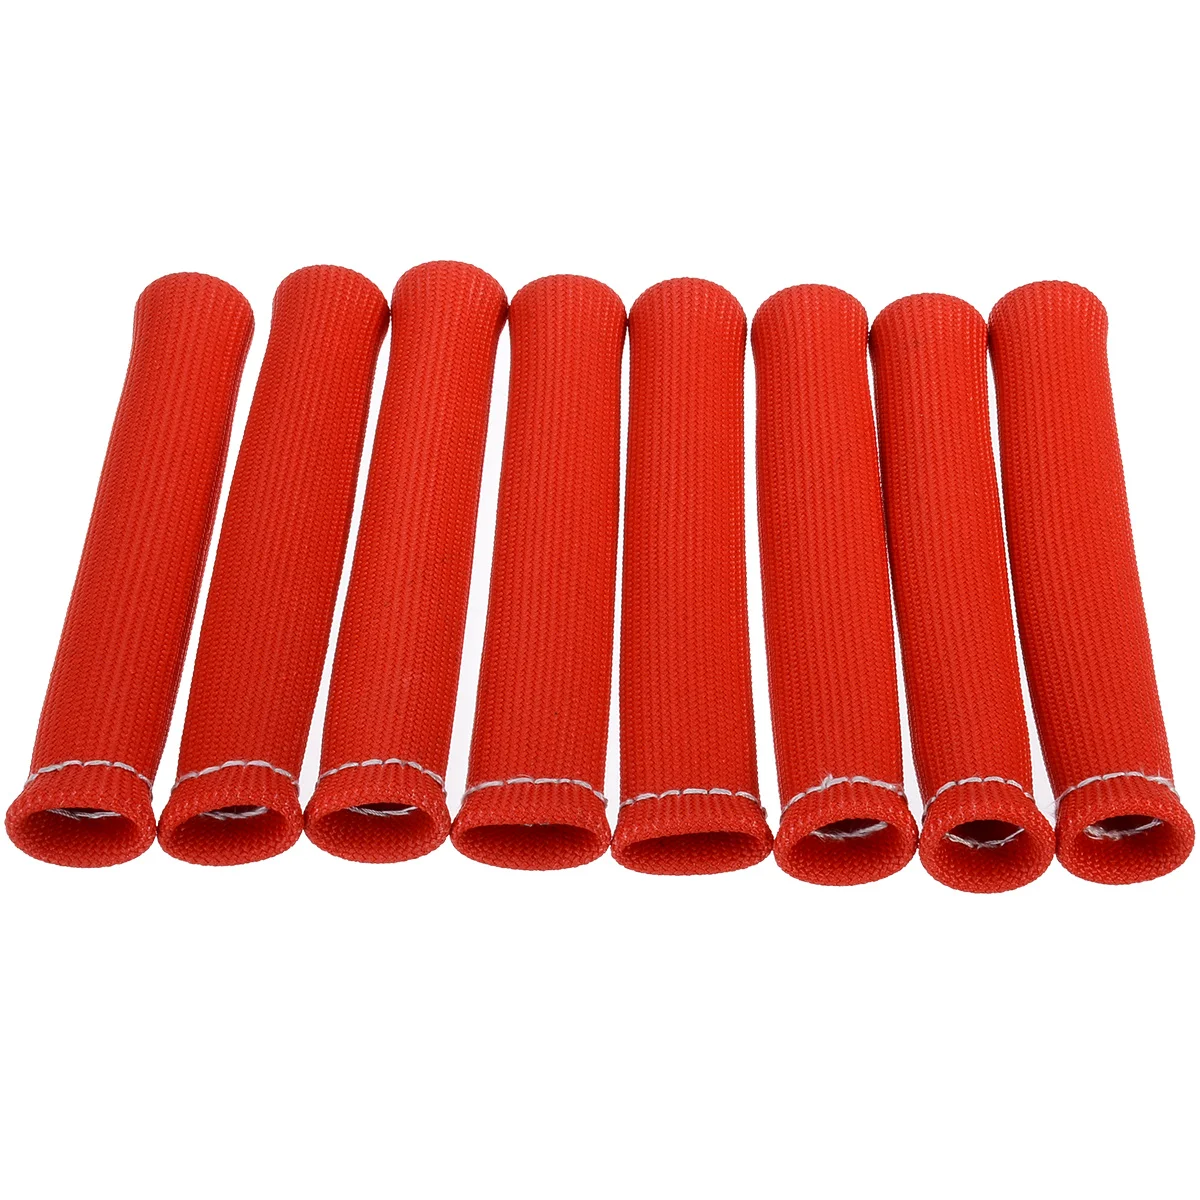 8pcs Red 1200F Spark Plug Wire Boots Heat Shield Protector Sleeve Sbc BBC 350 454 Engines For GM Chevy Buick